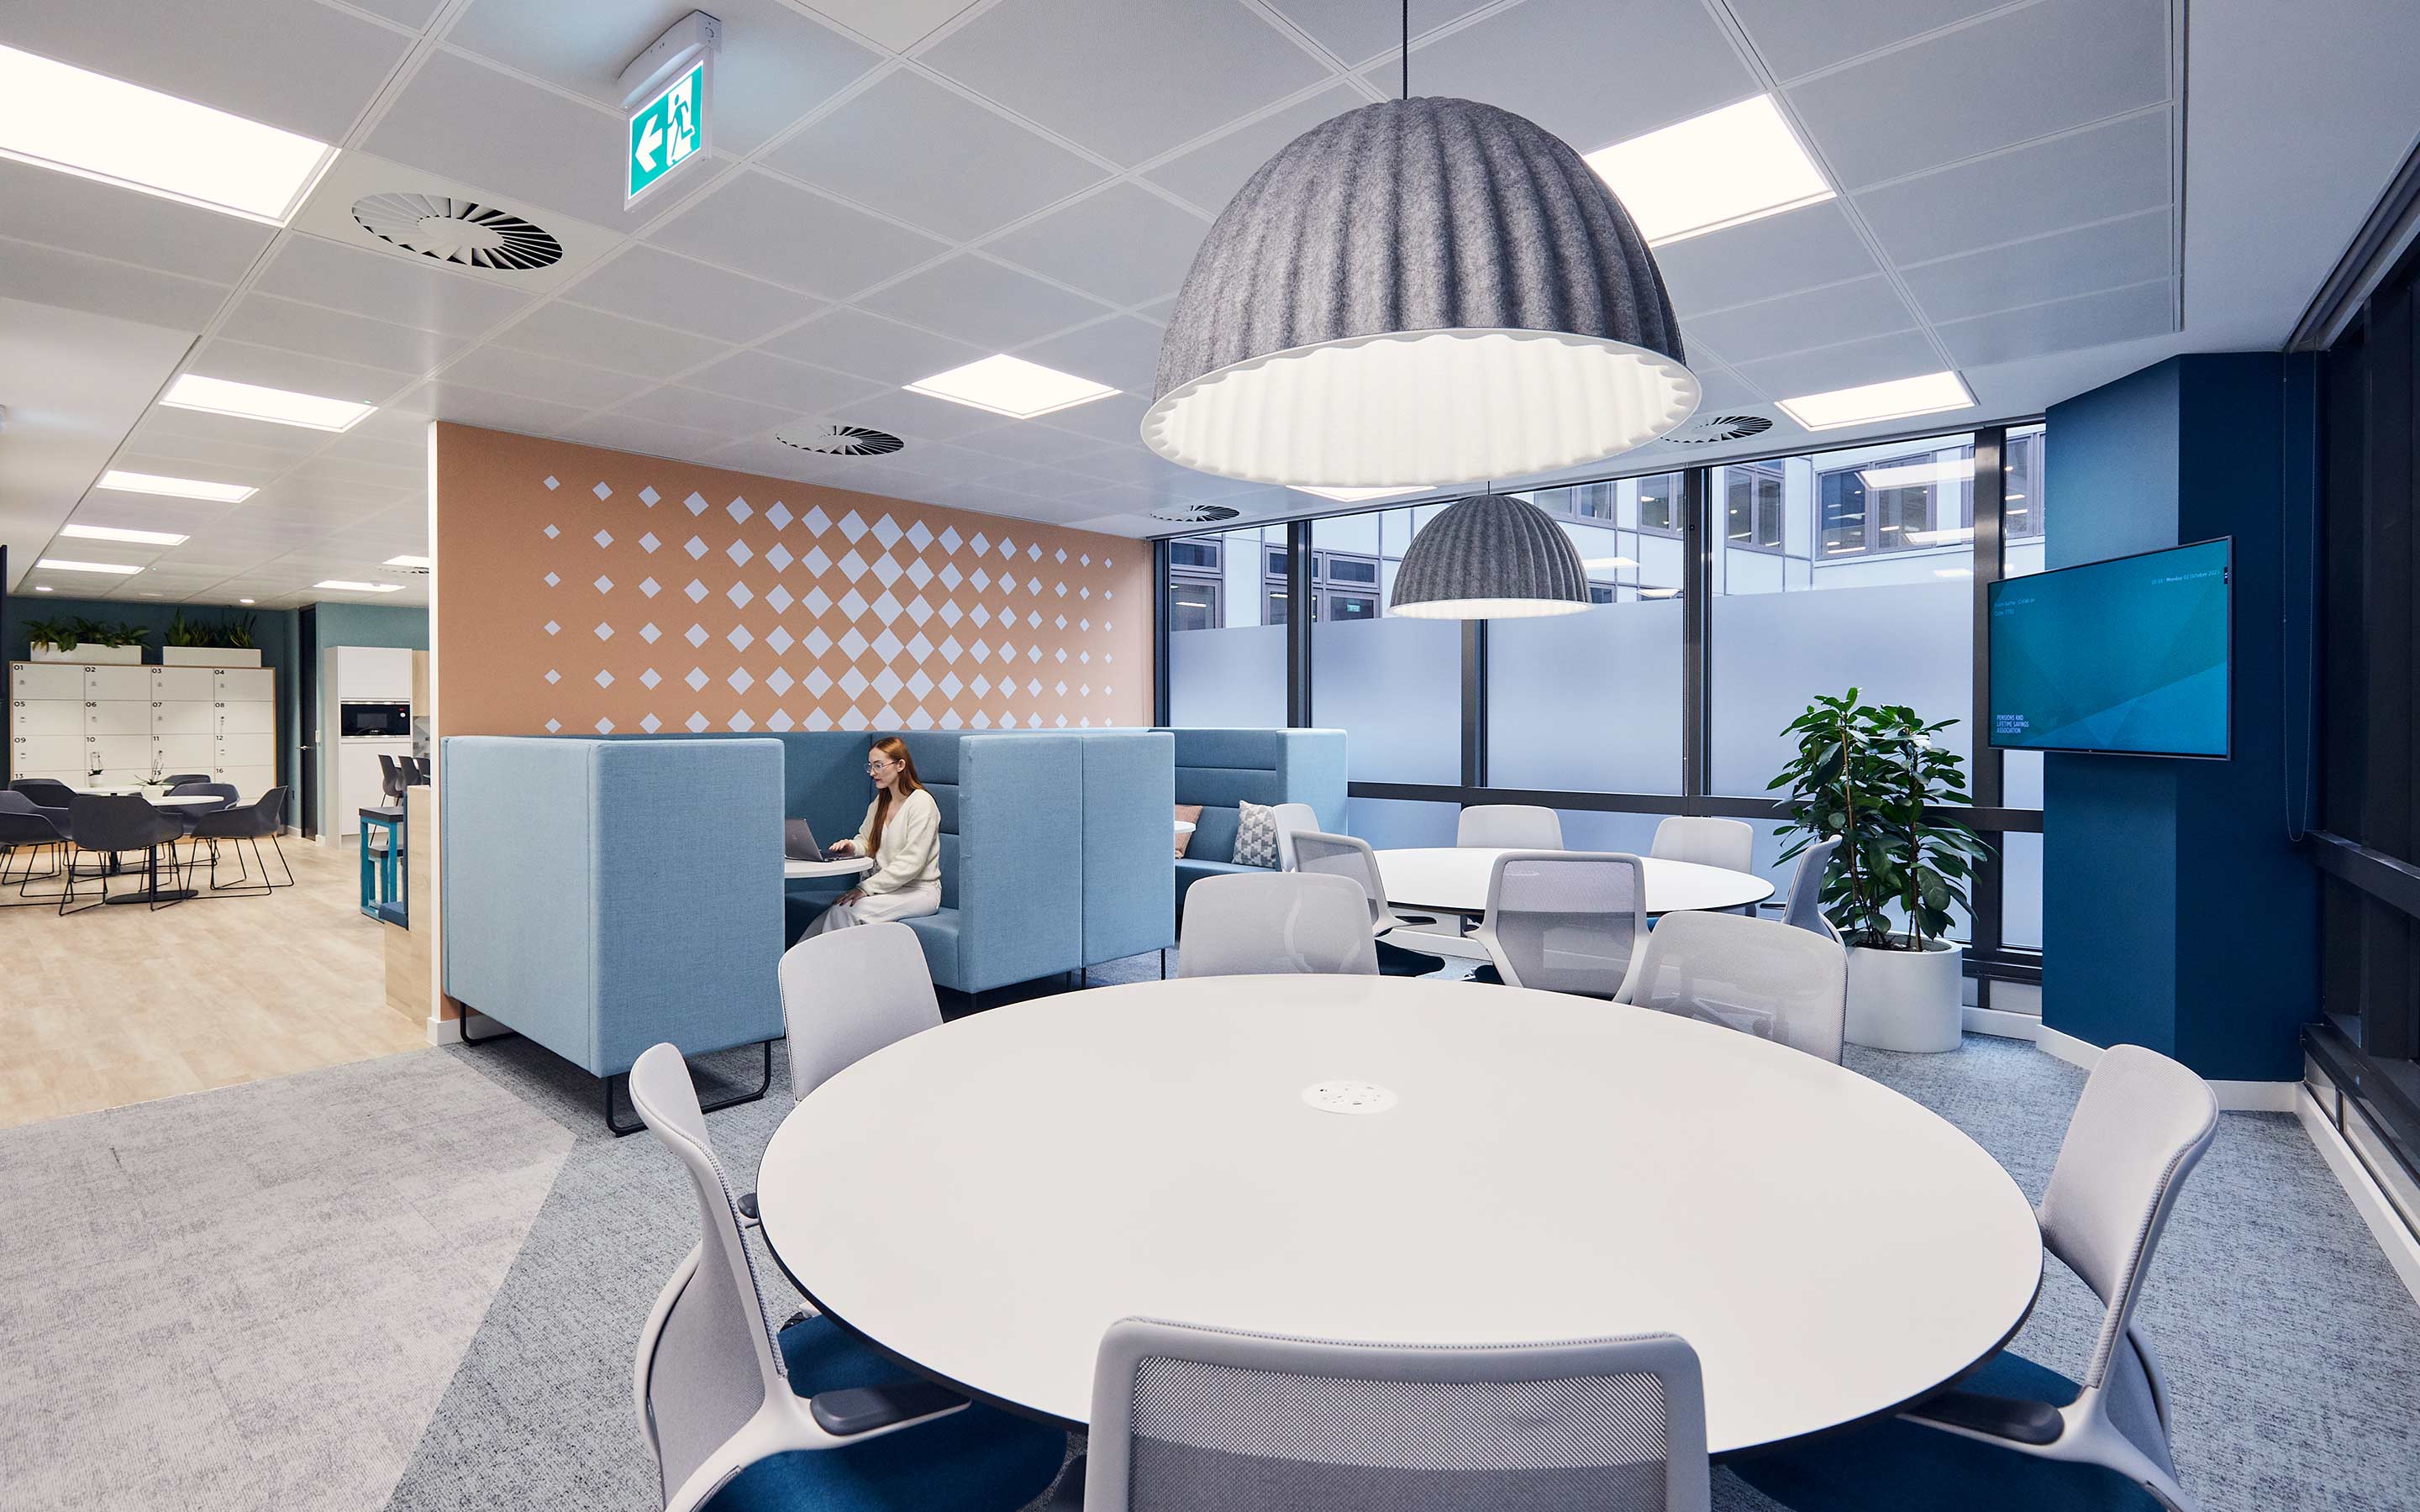 A breakout space features large dome pendant lighting, collaboration round tables, meeting booths, and a blue aesthetic